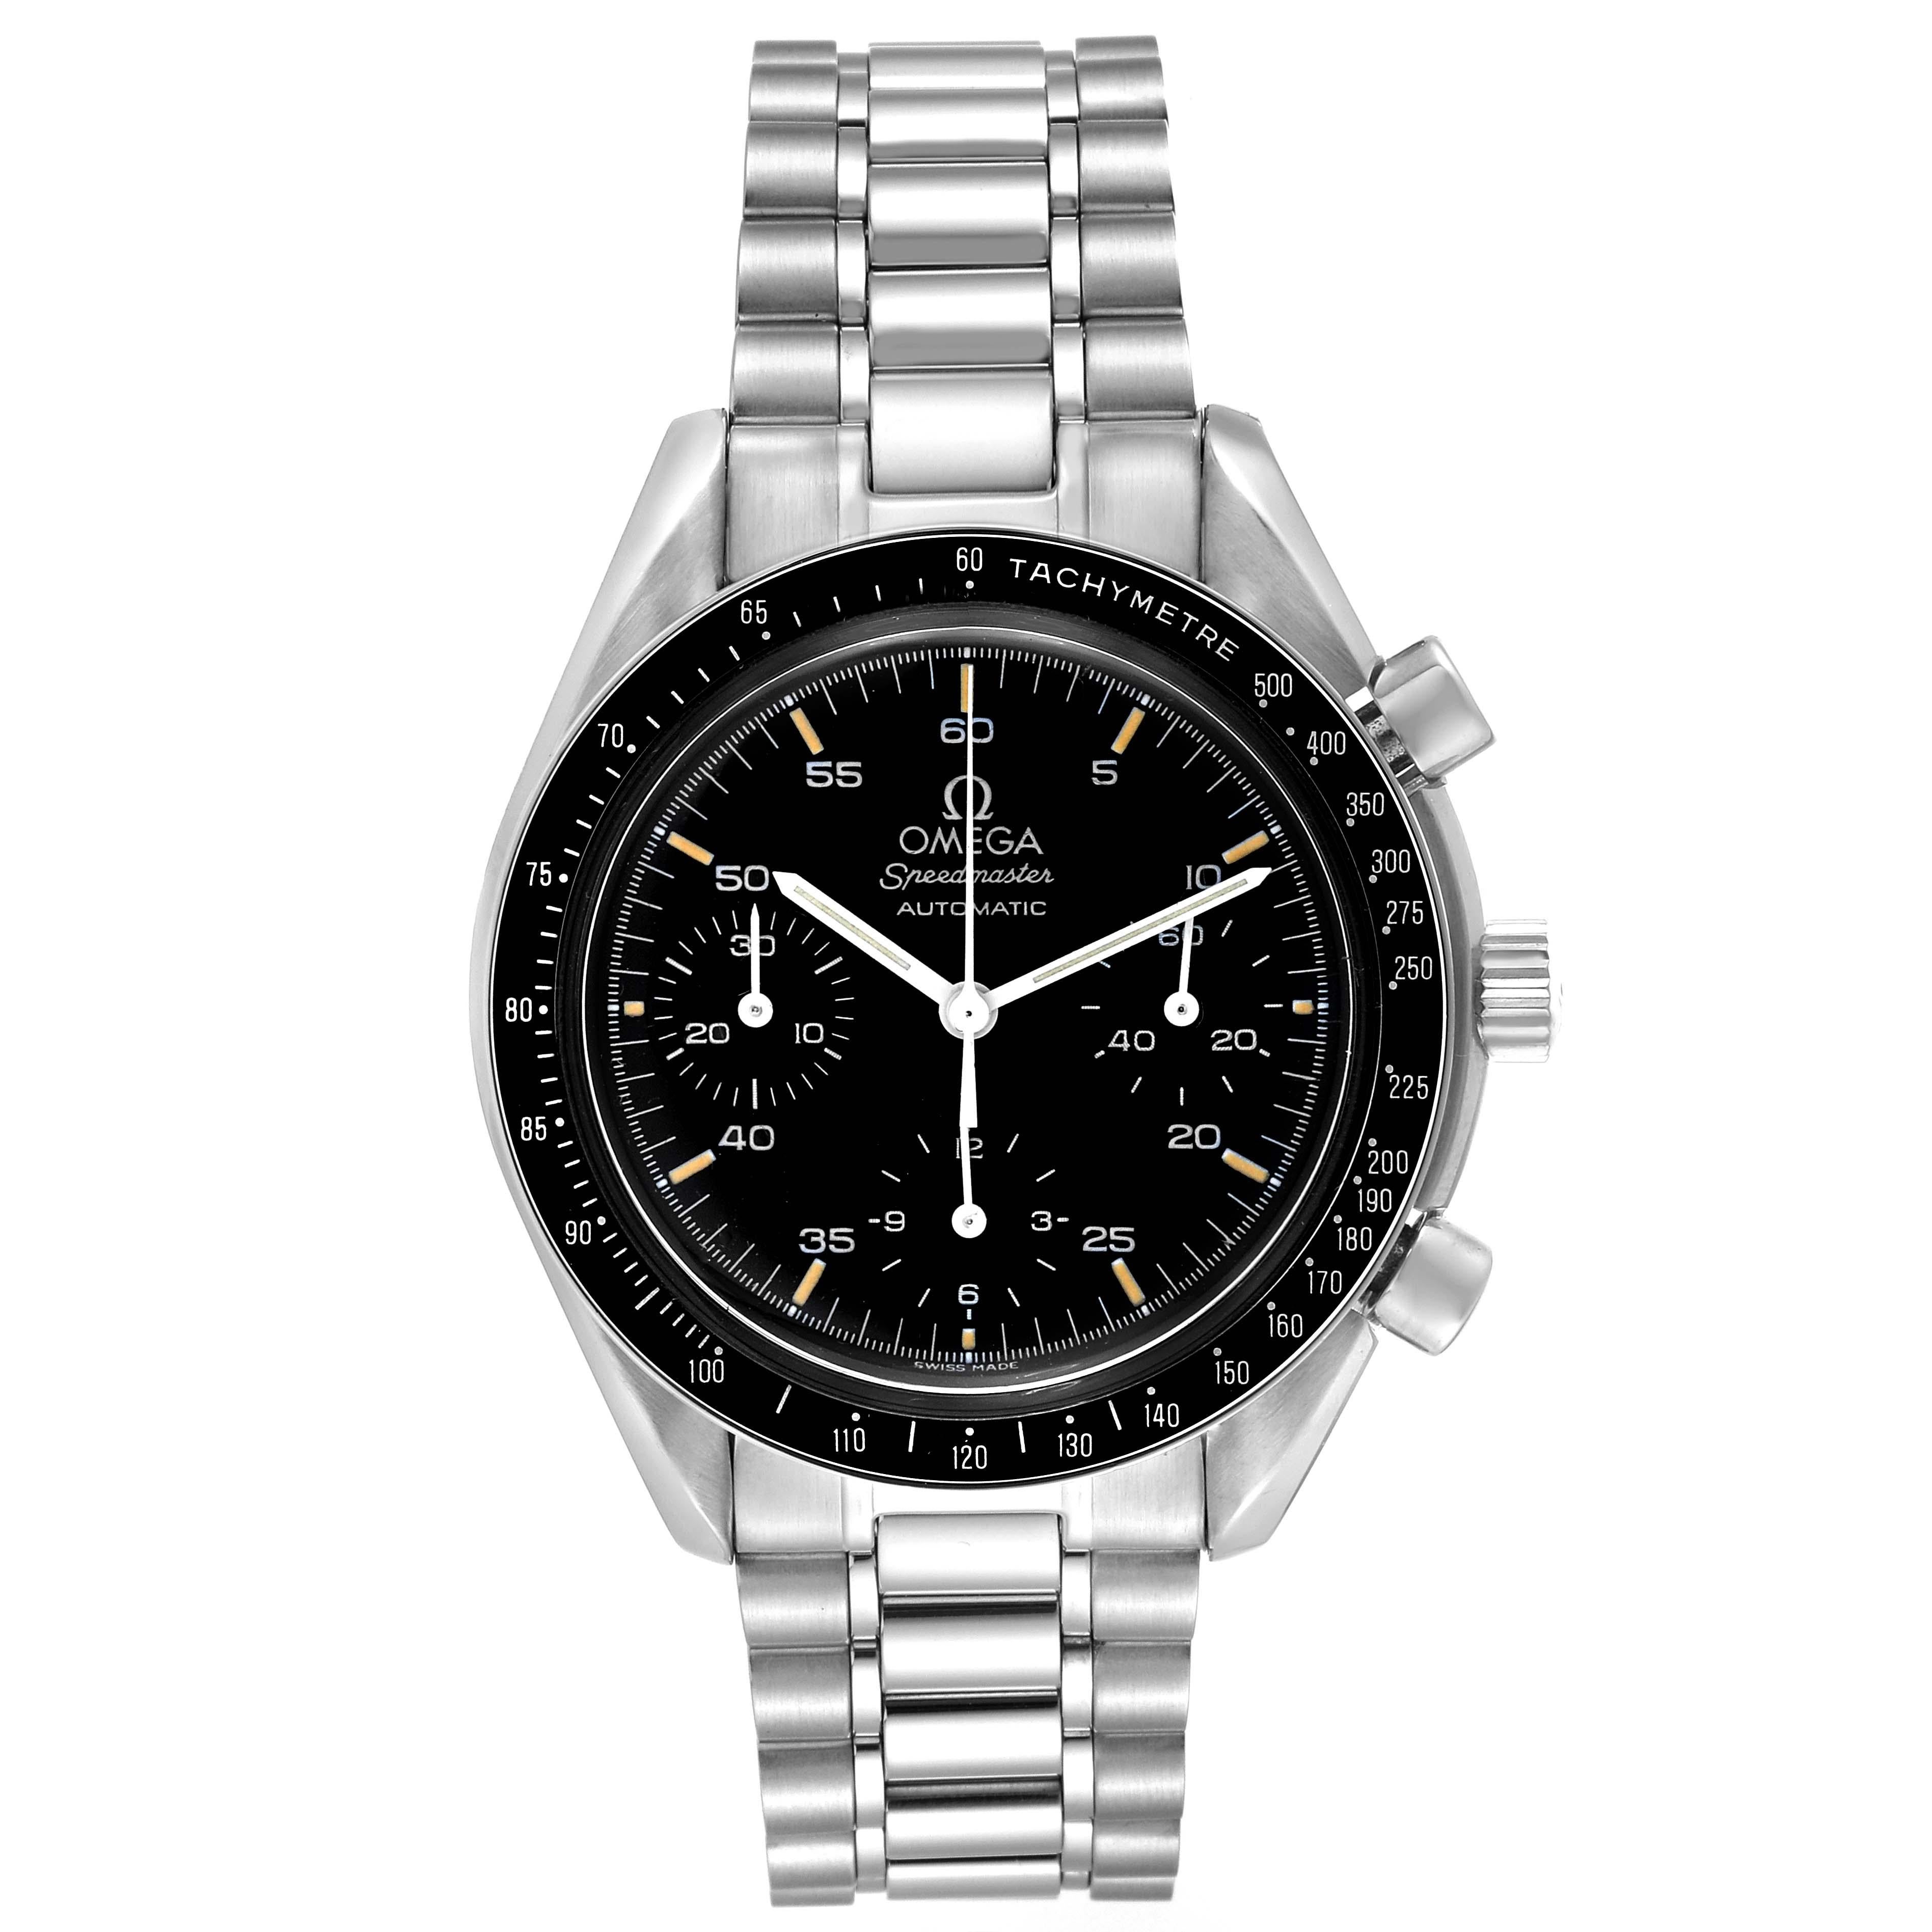 Omega Speedmaster Reduced Chronograph Hesalite Steel Mens Watch 3510.50.00. Automatic self-winding chronograph movement. Stainless steel round case 39.0 mm in diameter. Stainless steel bezel with black insert and tachymeter function. Hesalite